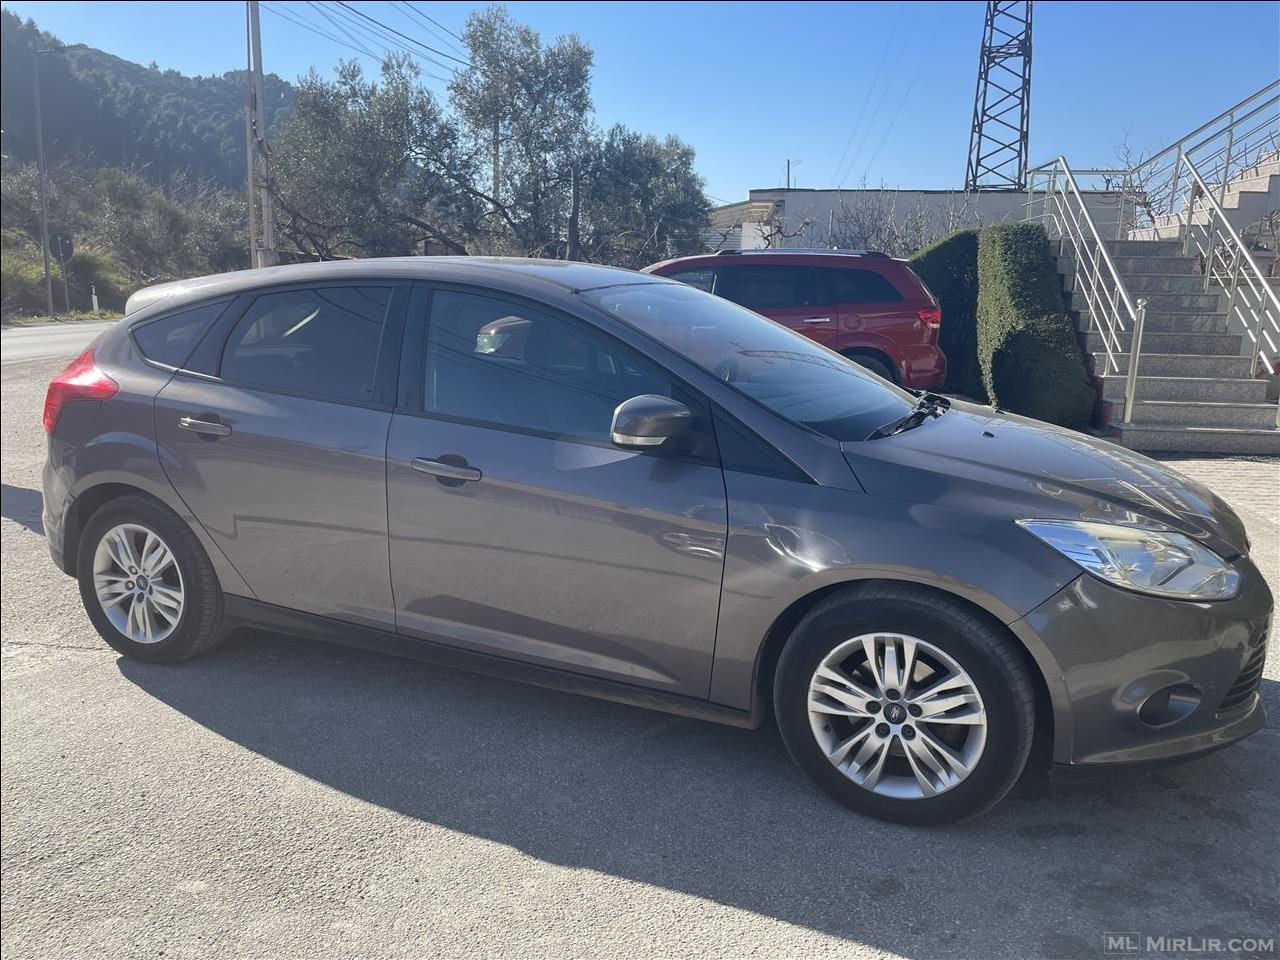 Ford Focus 2012, 1.6 Nafte